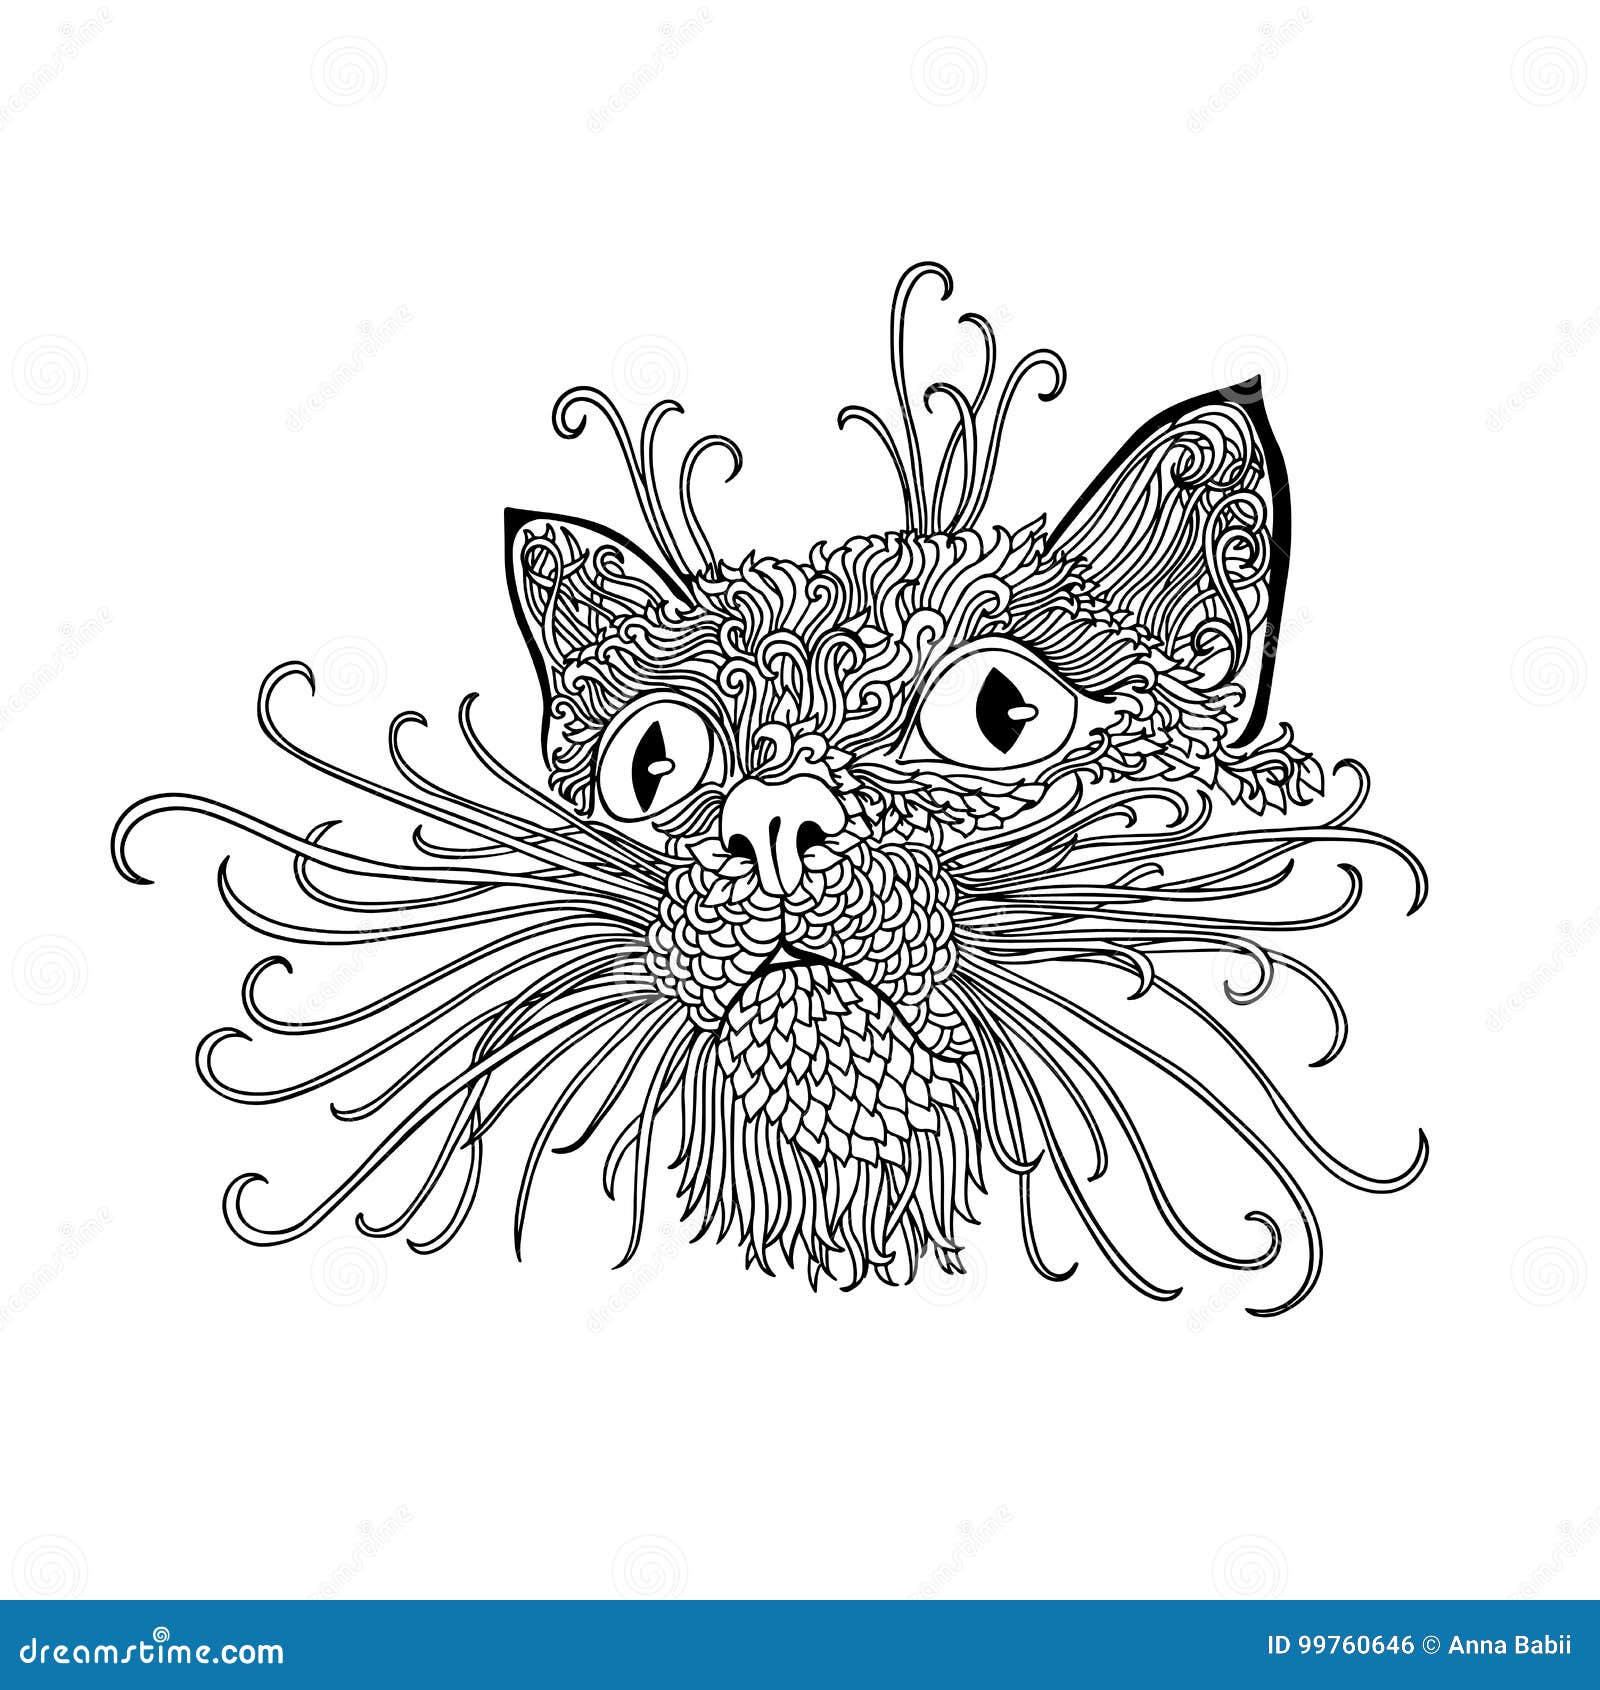 Black and Wite Cat with Ethnic Floral Ornaments for Adult Coloring Book ...